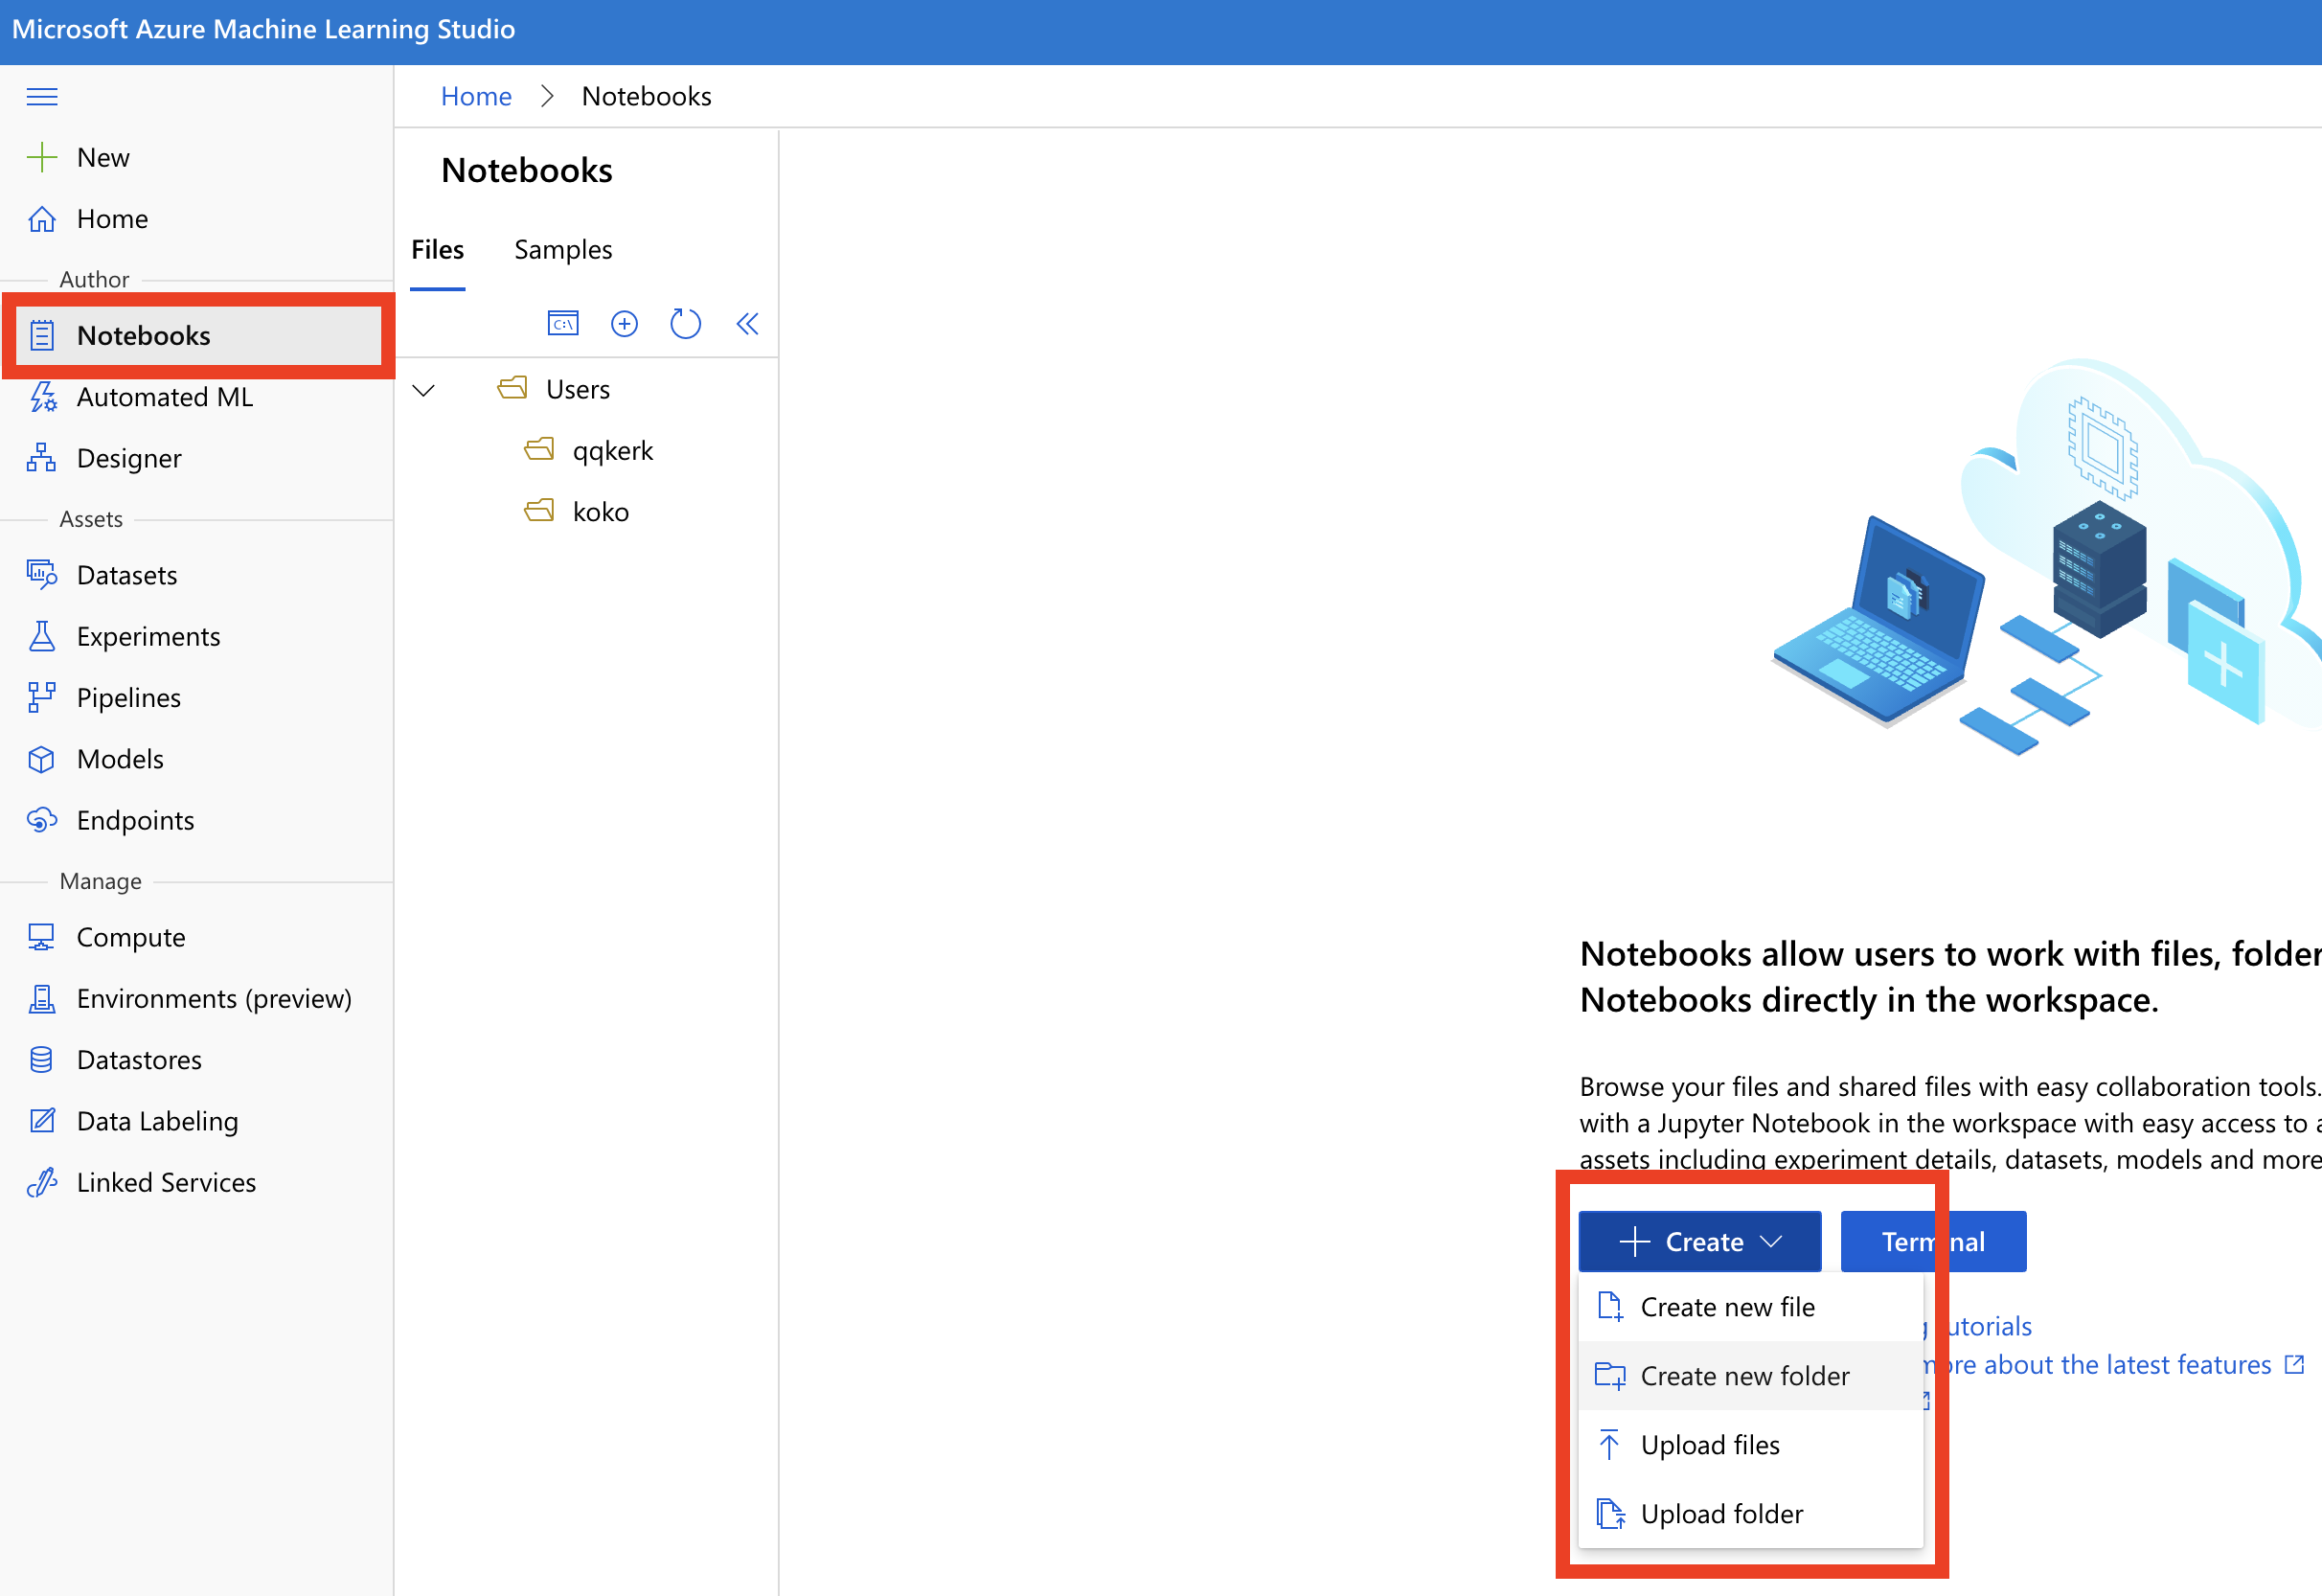 Use Notebooks in Azure machine learning